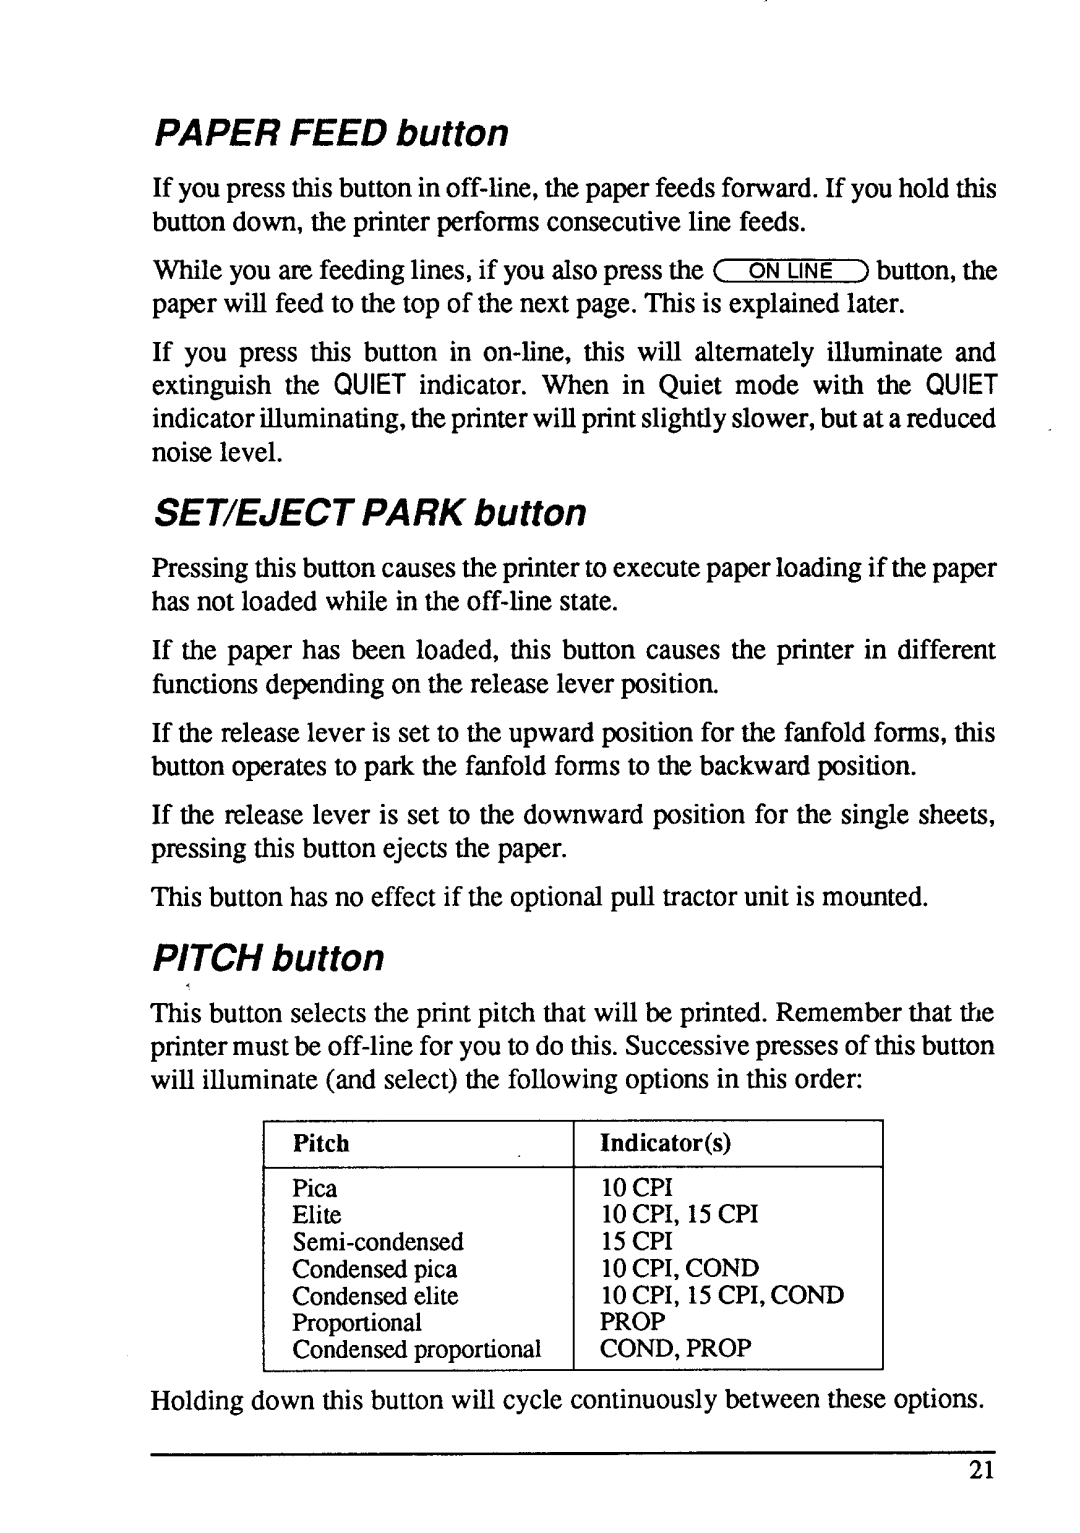 Star Micronics LC24-15 user manual PAPER FEED button, SET/EJECT PARK button, PITCH button 